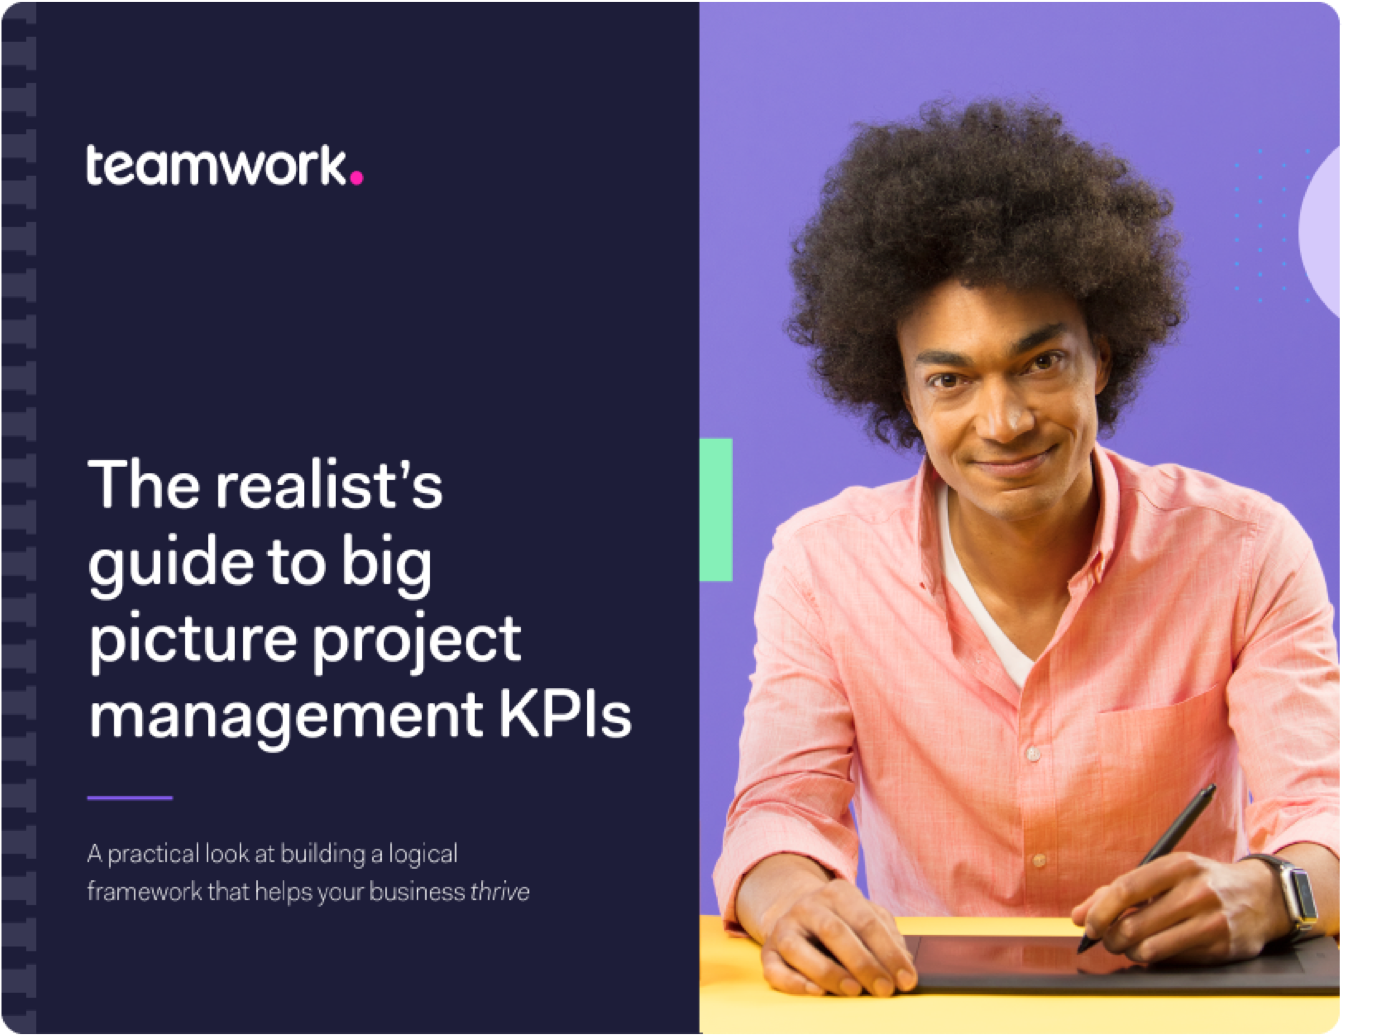 The realist’s guide to big picture project management KPIs